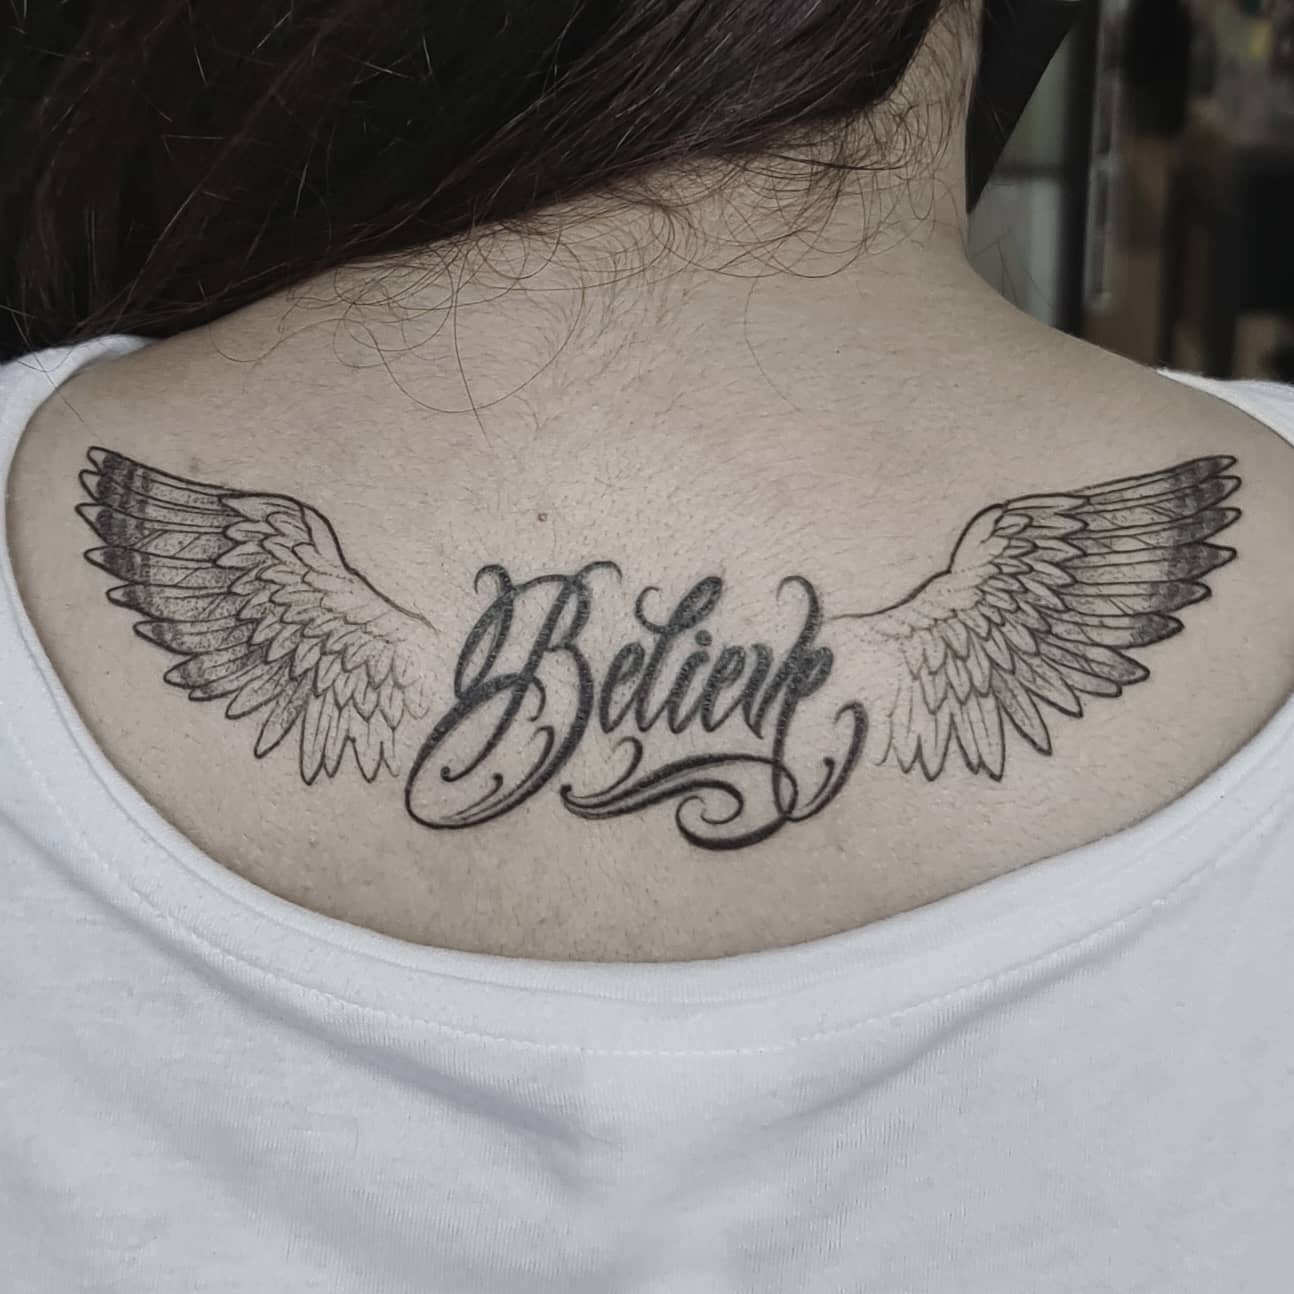 blessed tattoos with wings